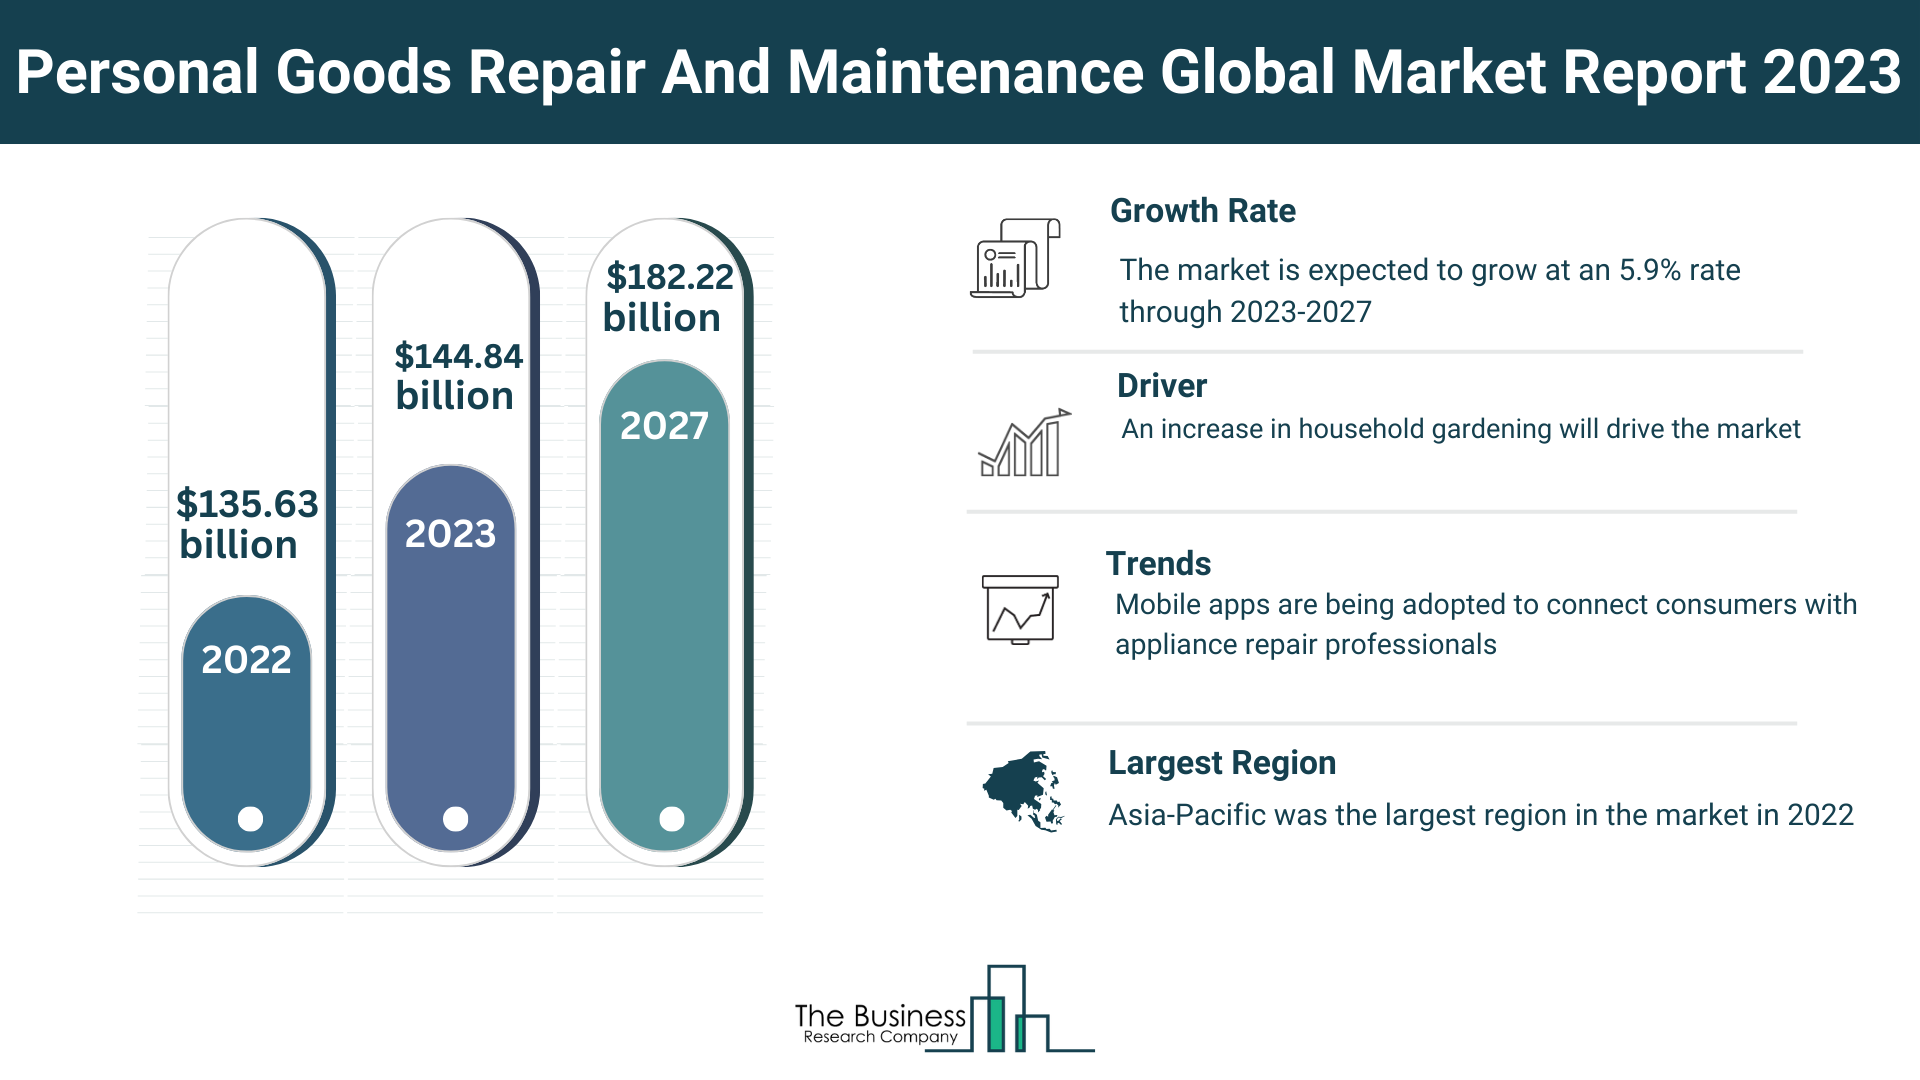 Global Personal Goods Repair And Maintenance Market Report 2023: Size, Drivers, And Top Segments